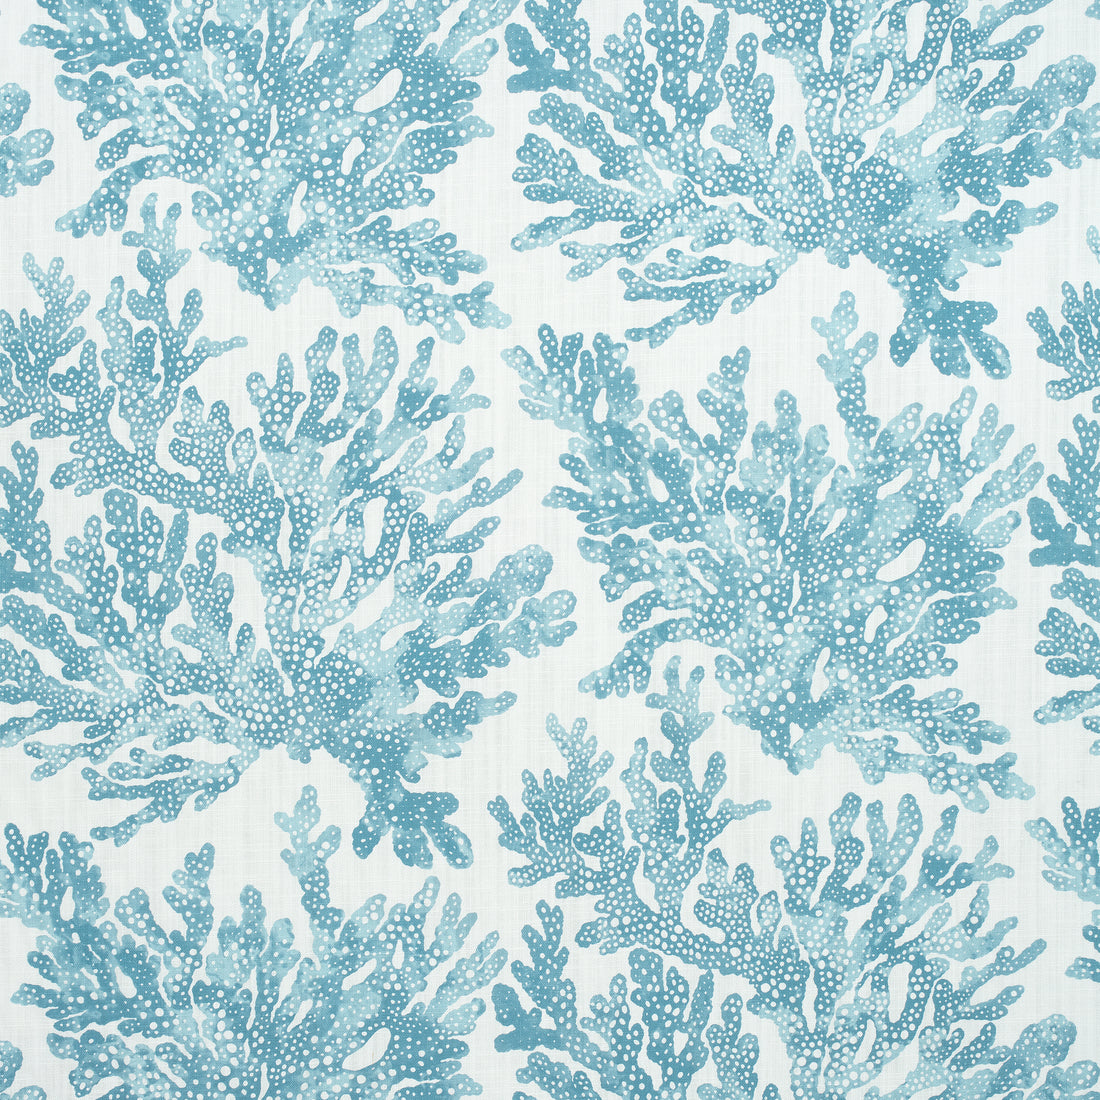 Marine Coral fabric in spa blue color - pattern number F910122 - by Thibaut in the Tropics collection